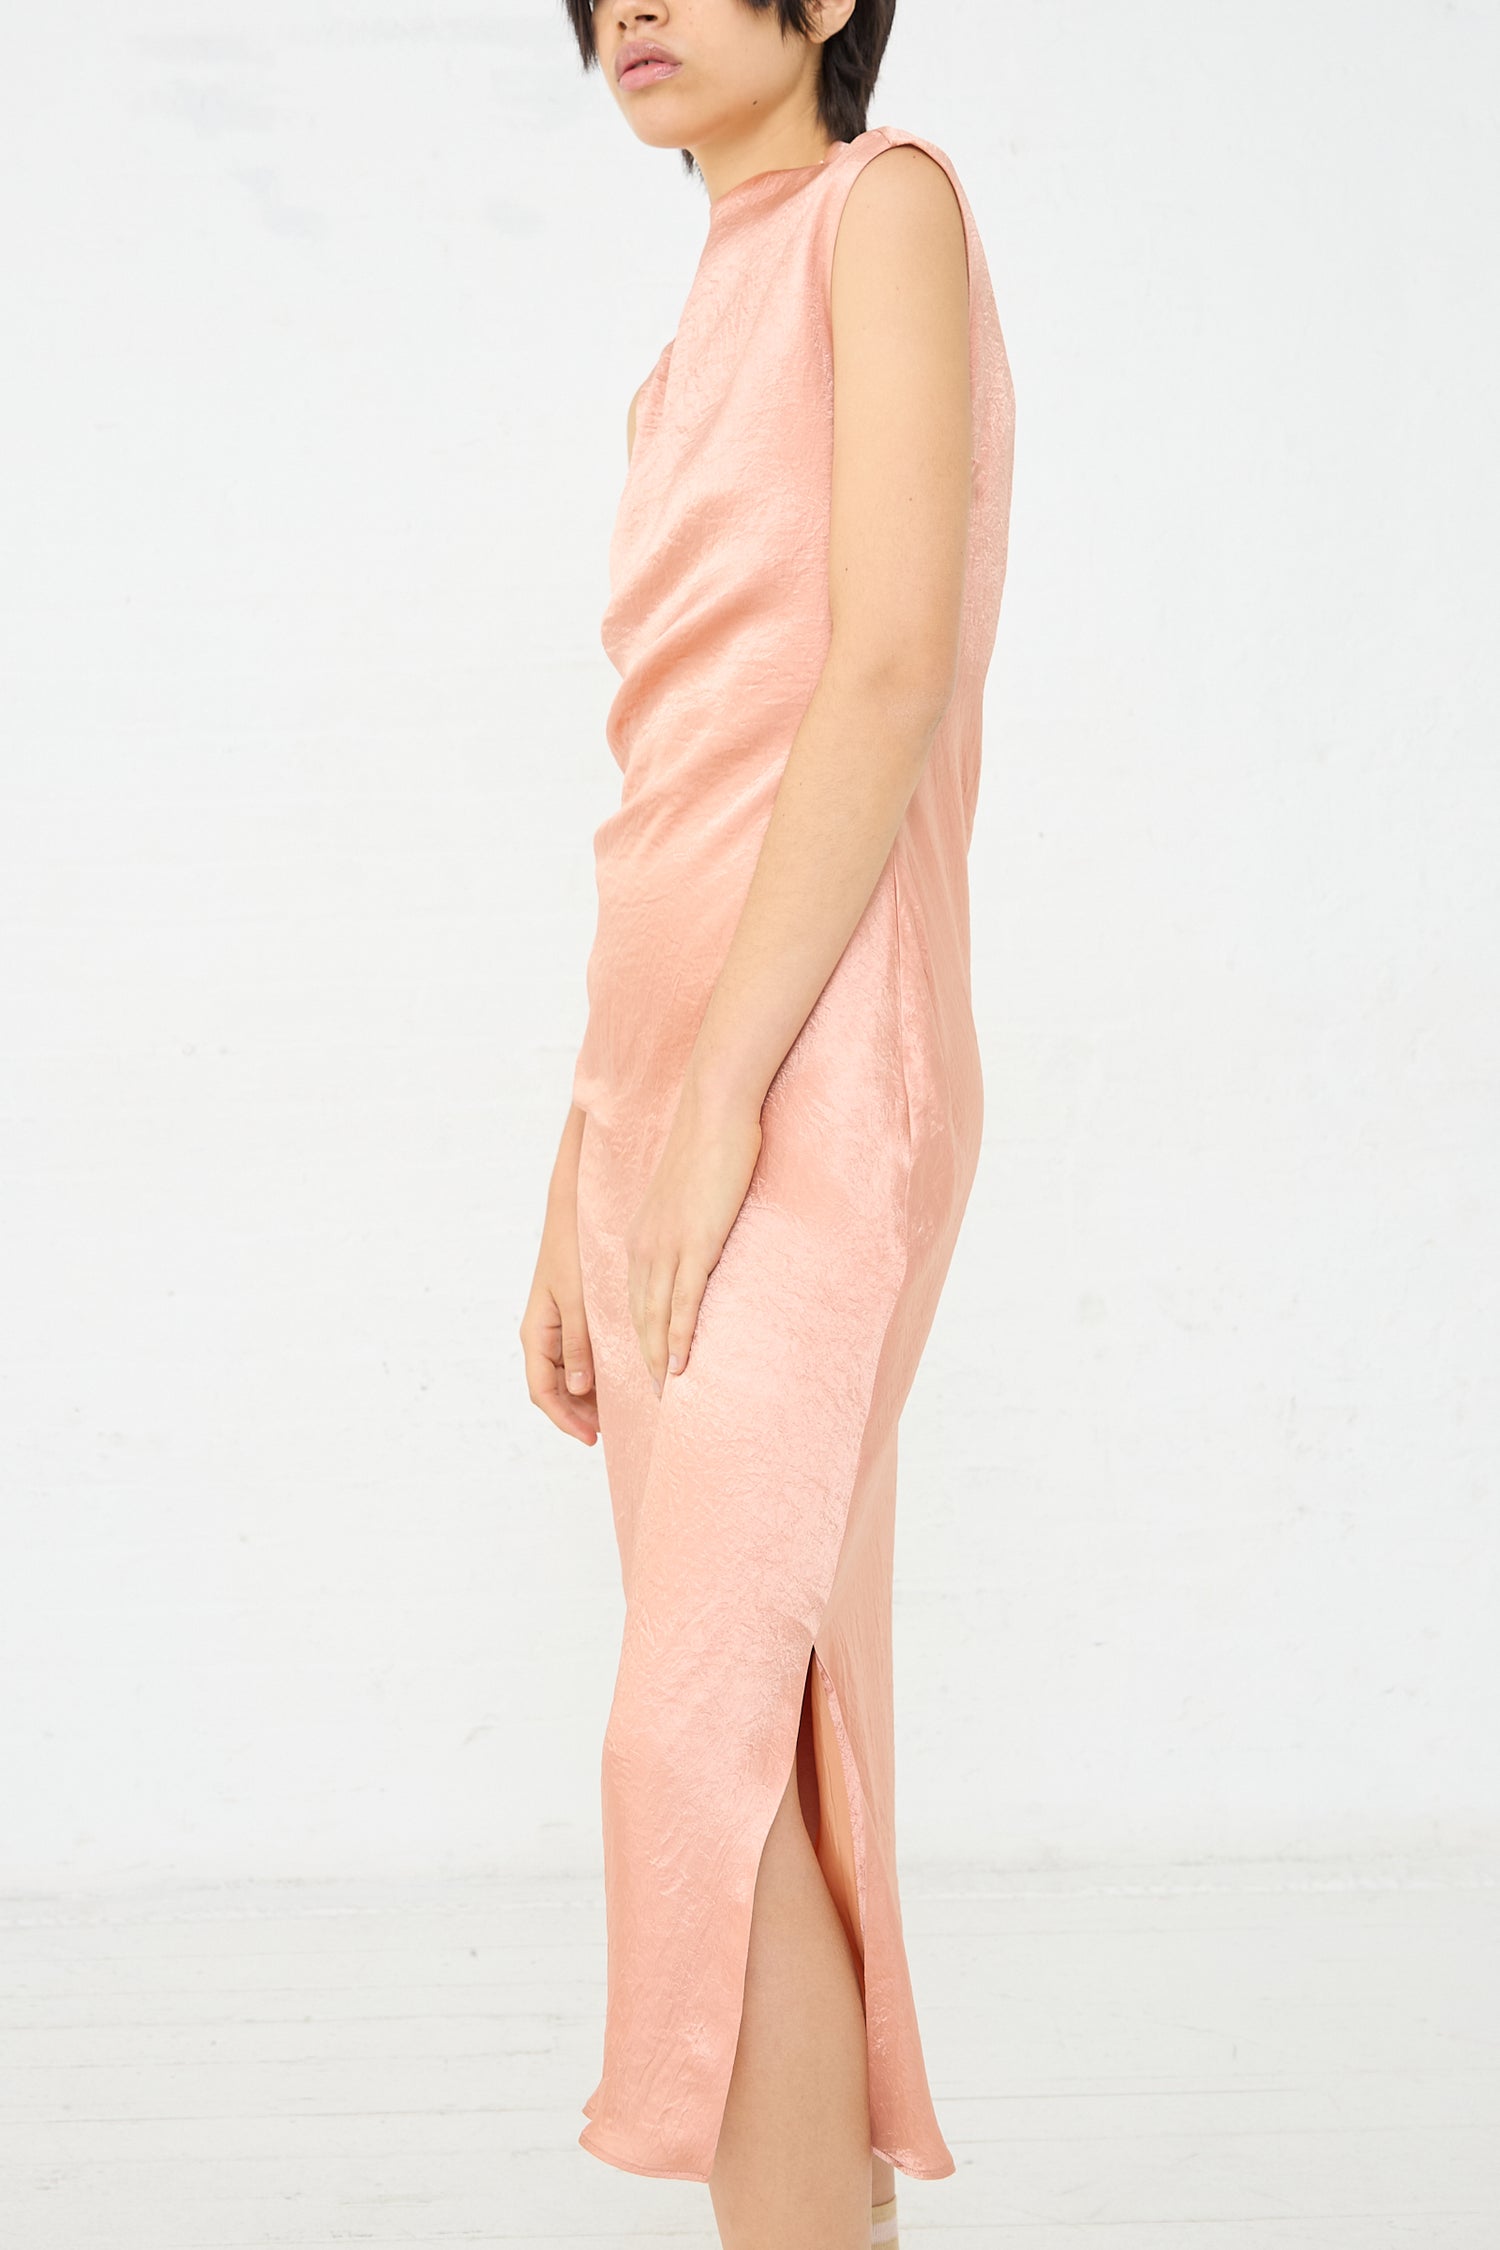 A woman wearing a Rejina Pyo Delilah Dress in Pink. Full length and side profile view.